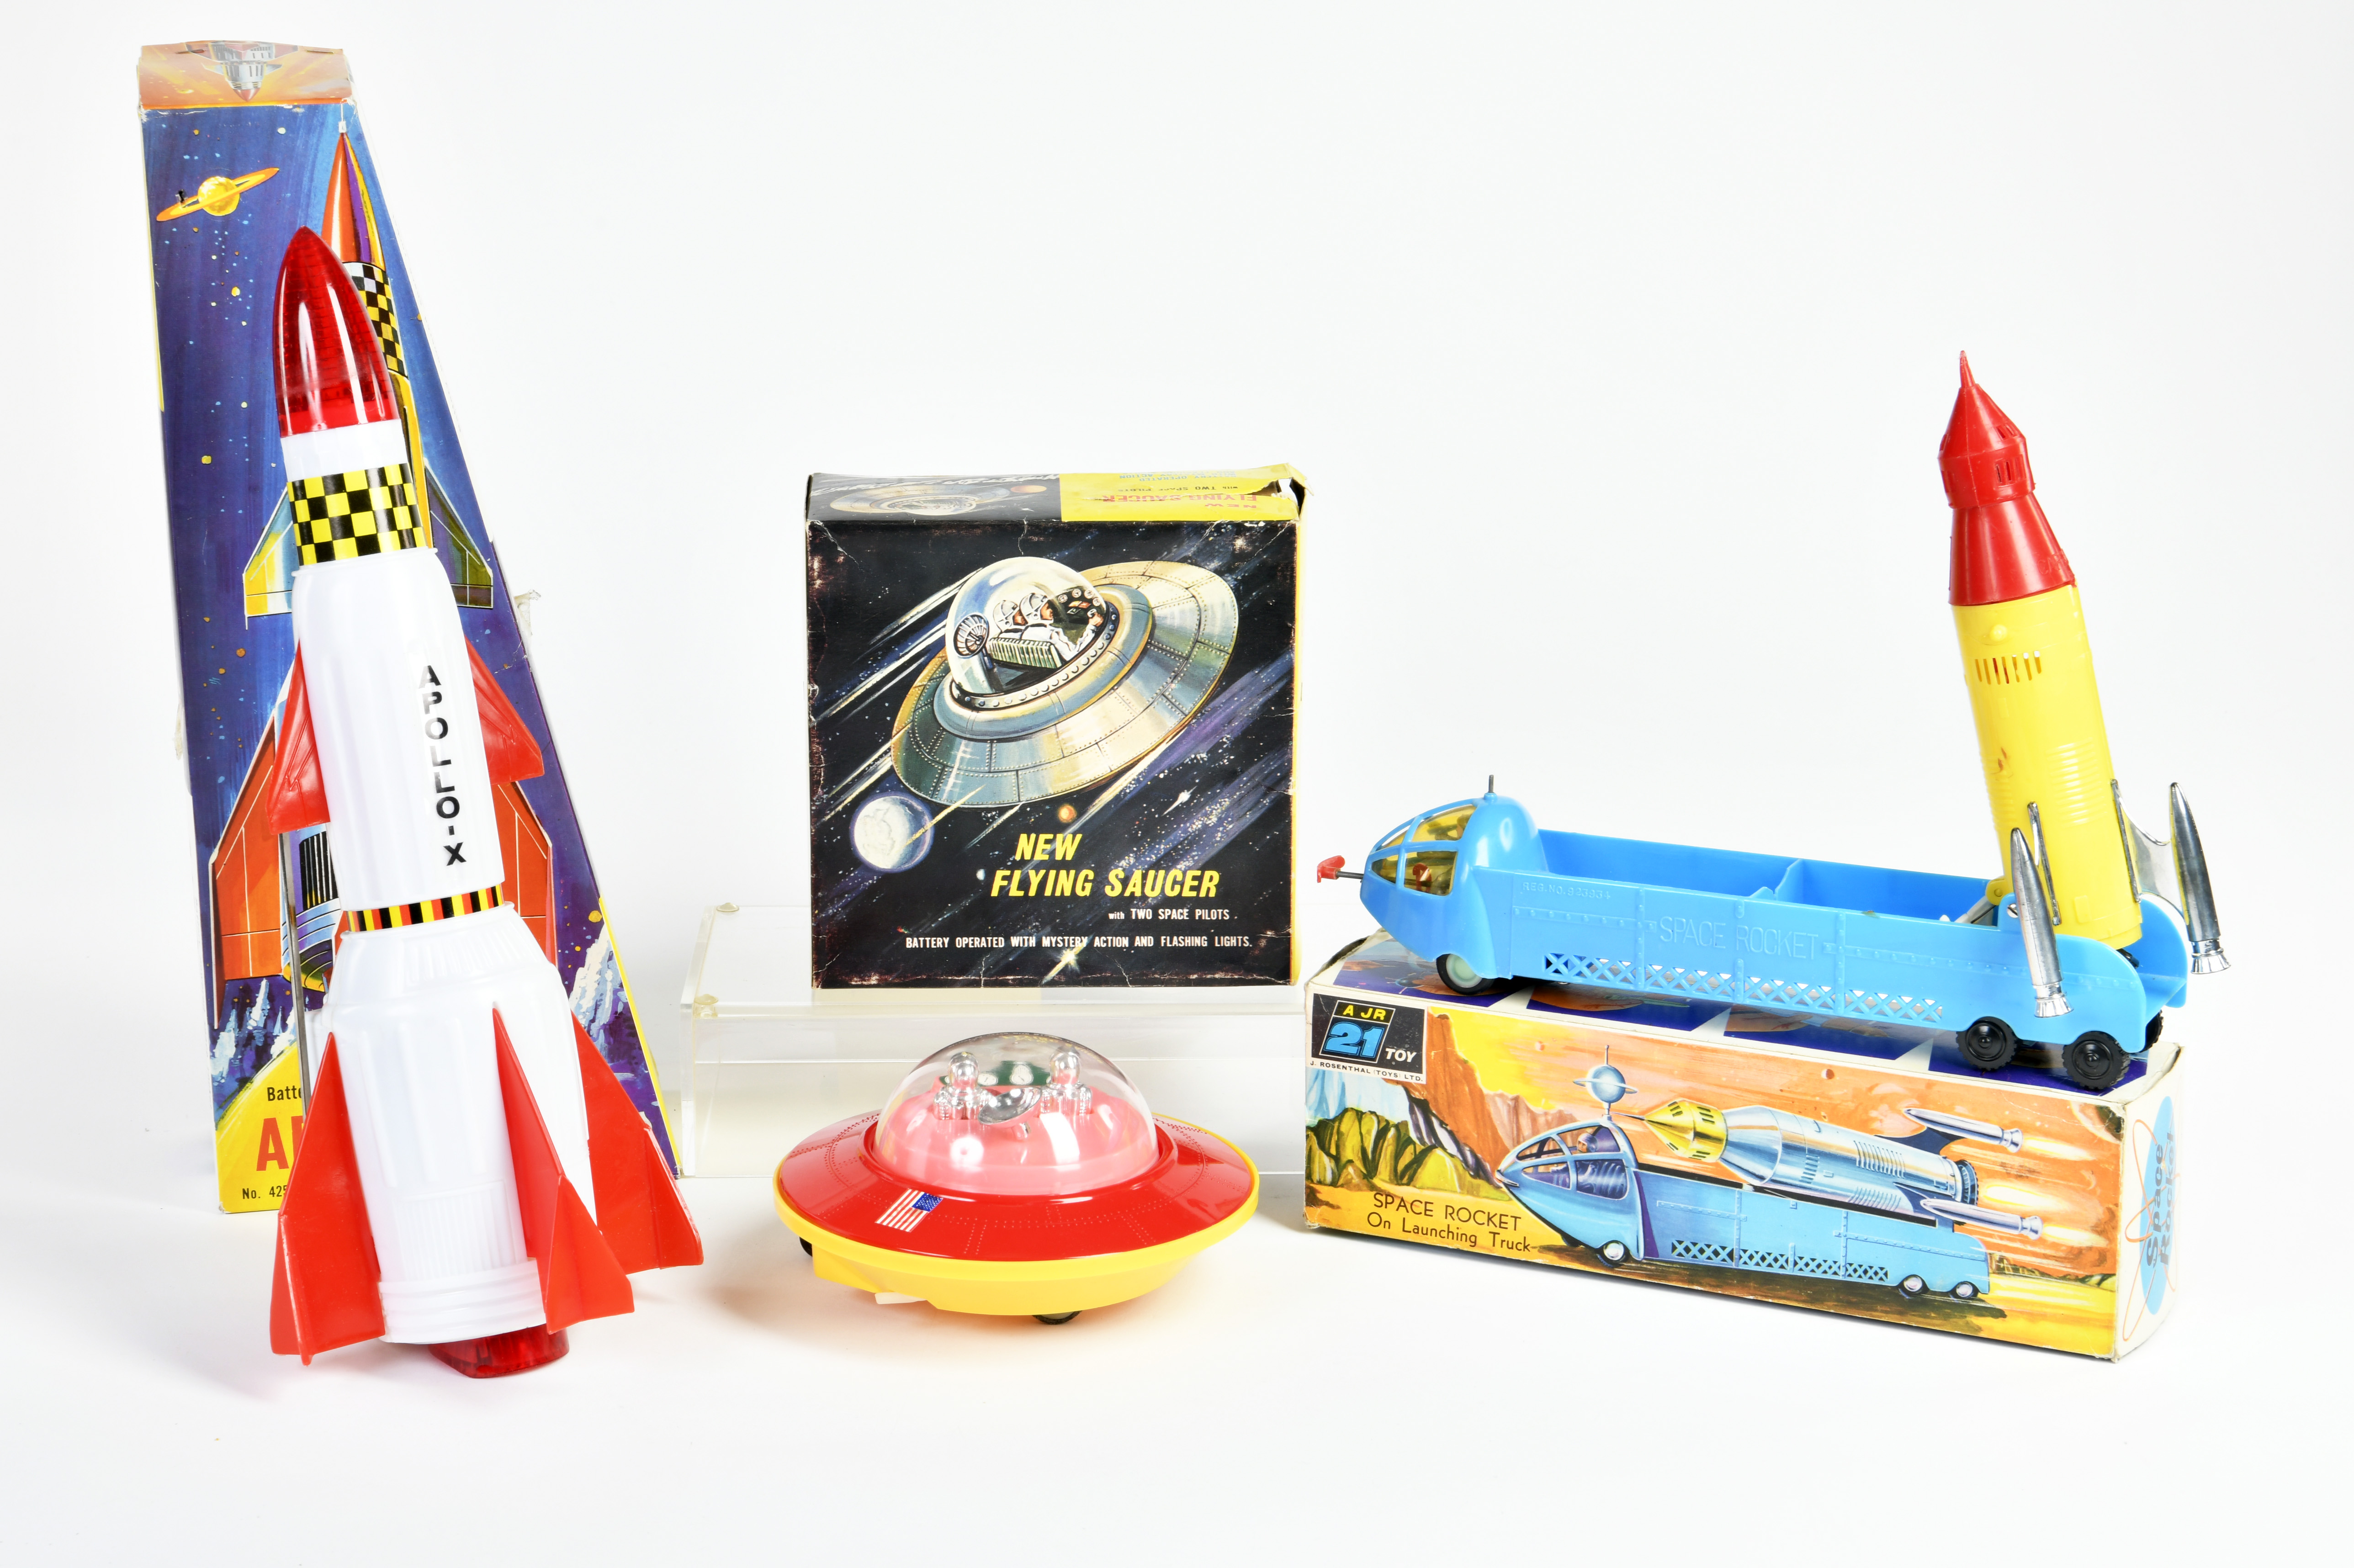 234 Space Rocket, 356 New Flying Saucer & 425 Apollo X, Hong Kong, plastic, not checked, box, C 1-2